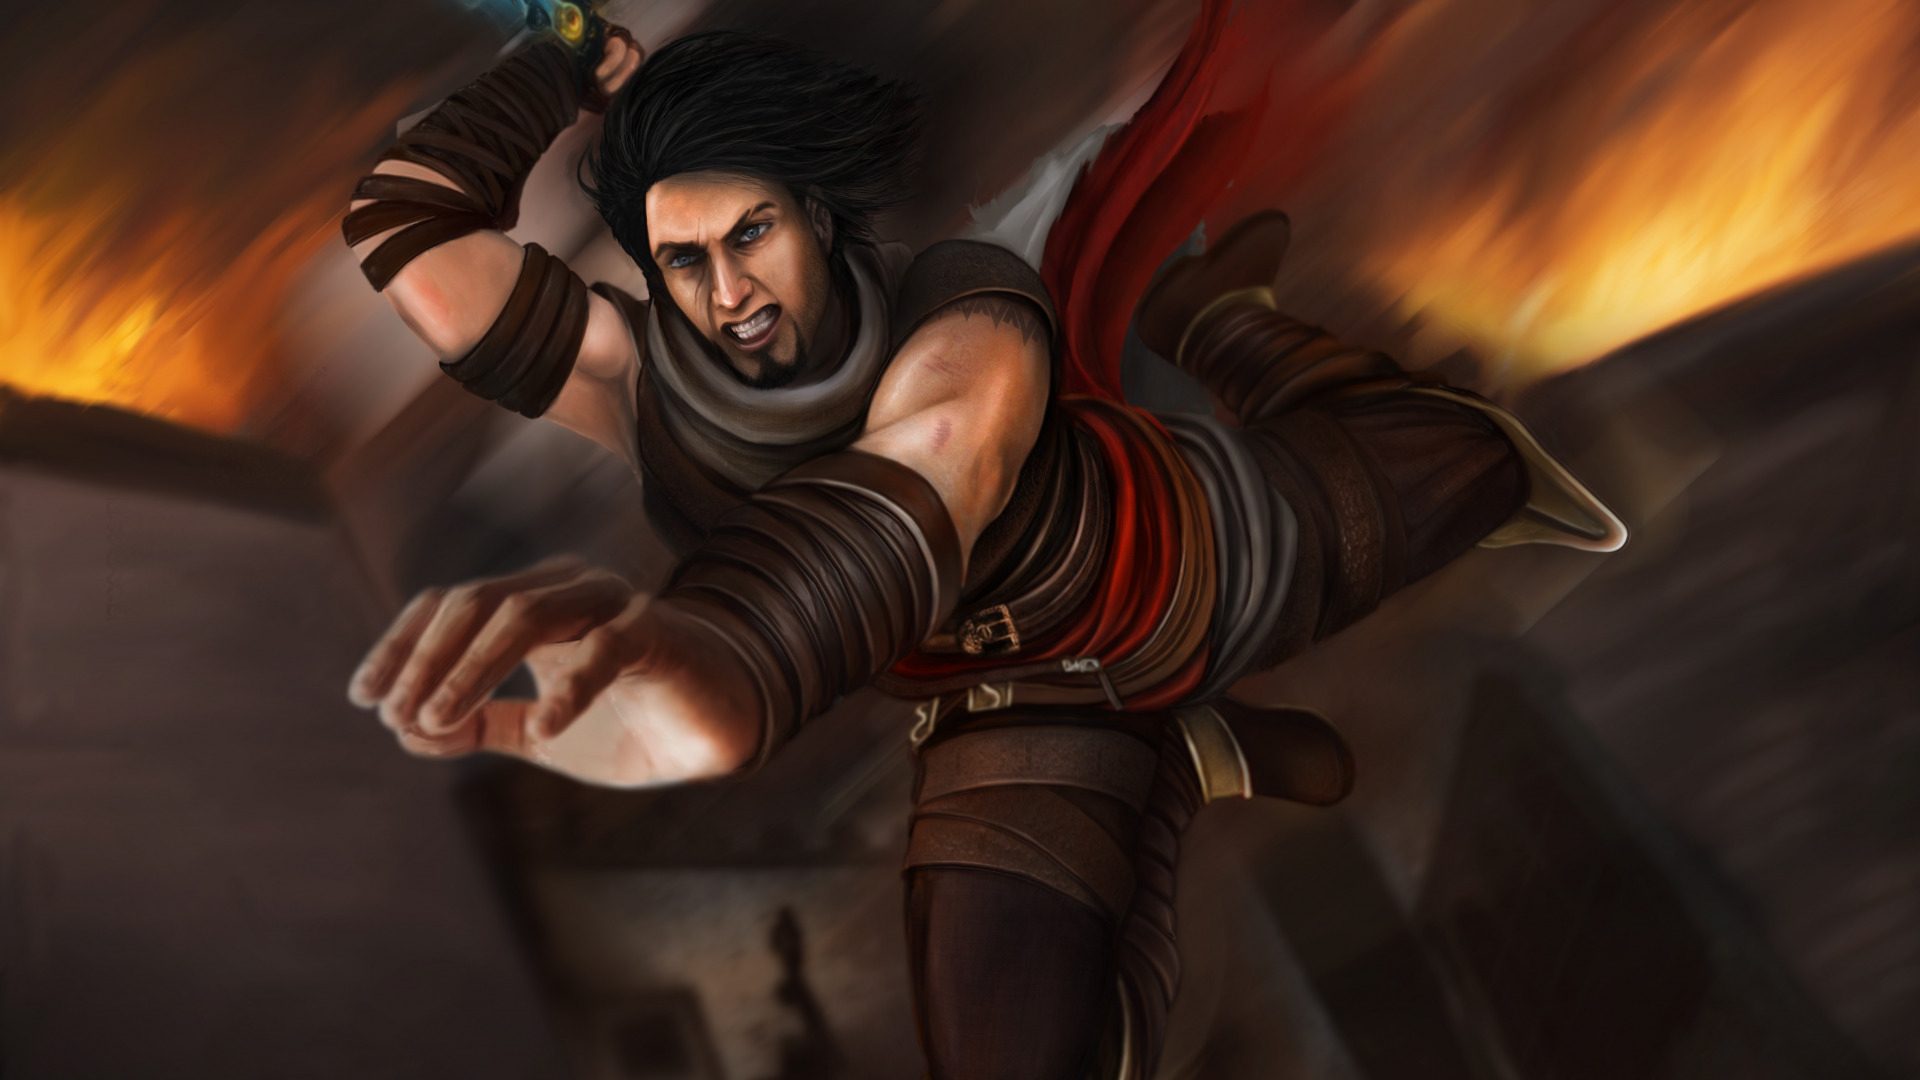 1920x1080 Download wallpaper jump, knife, fan art, prince of persia: warrior within, prince of persia the two thrones, prince of persia art, kindred blades, prince of persia kindred blades, section games in resoluti